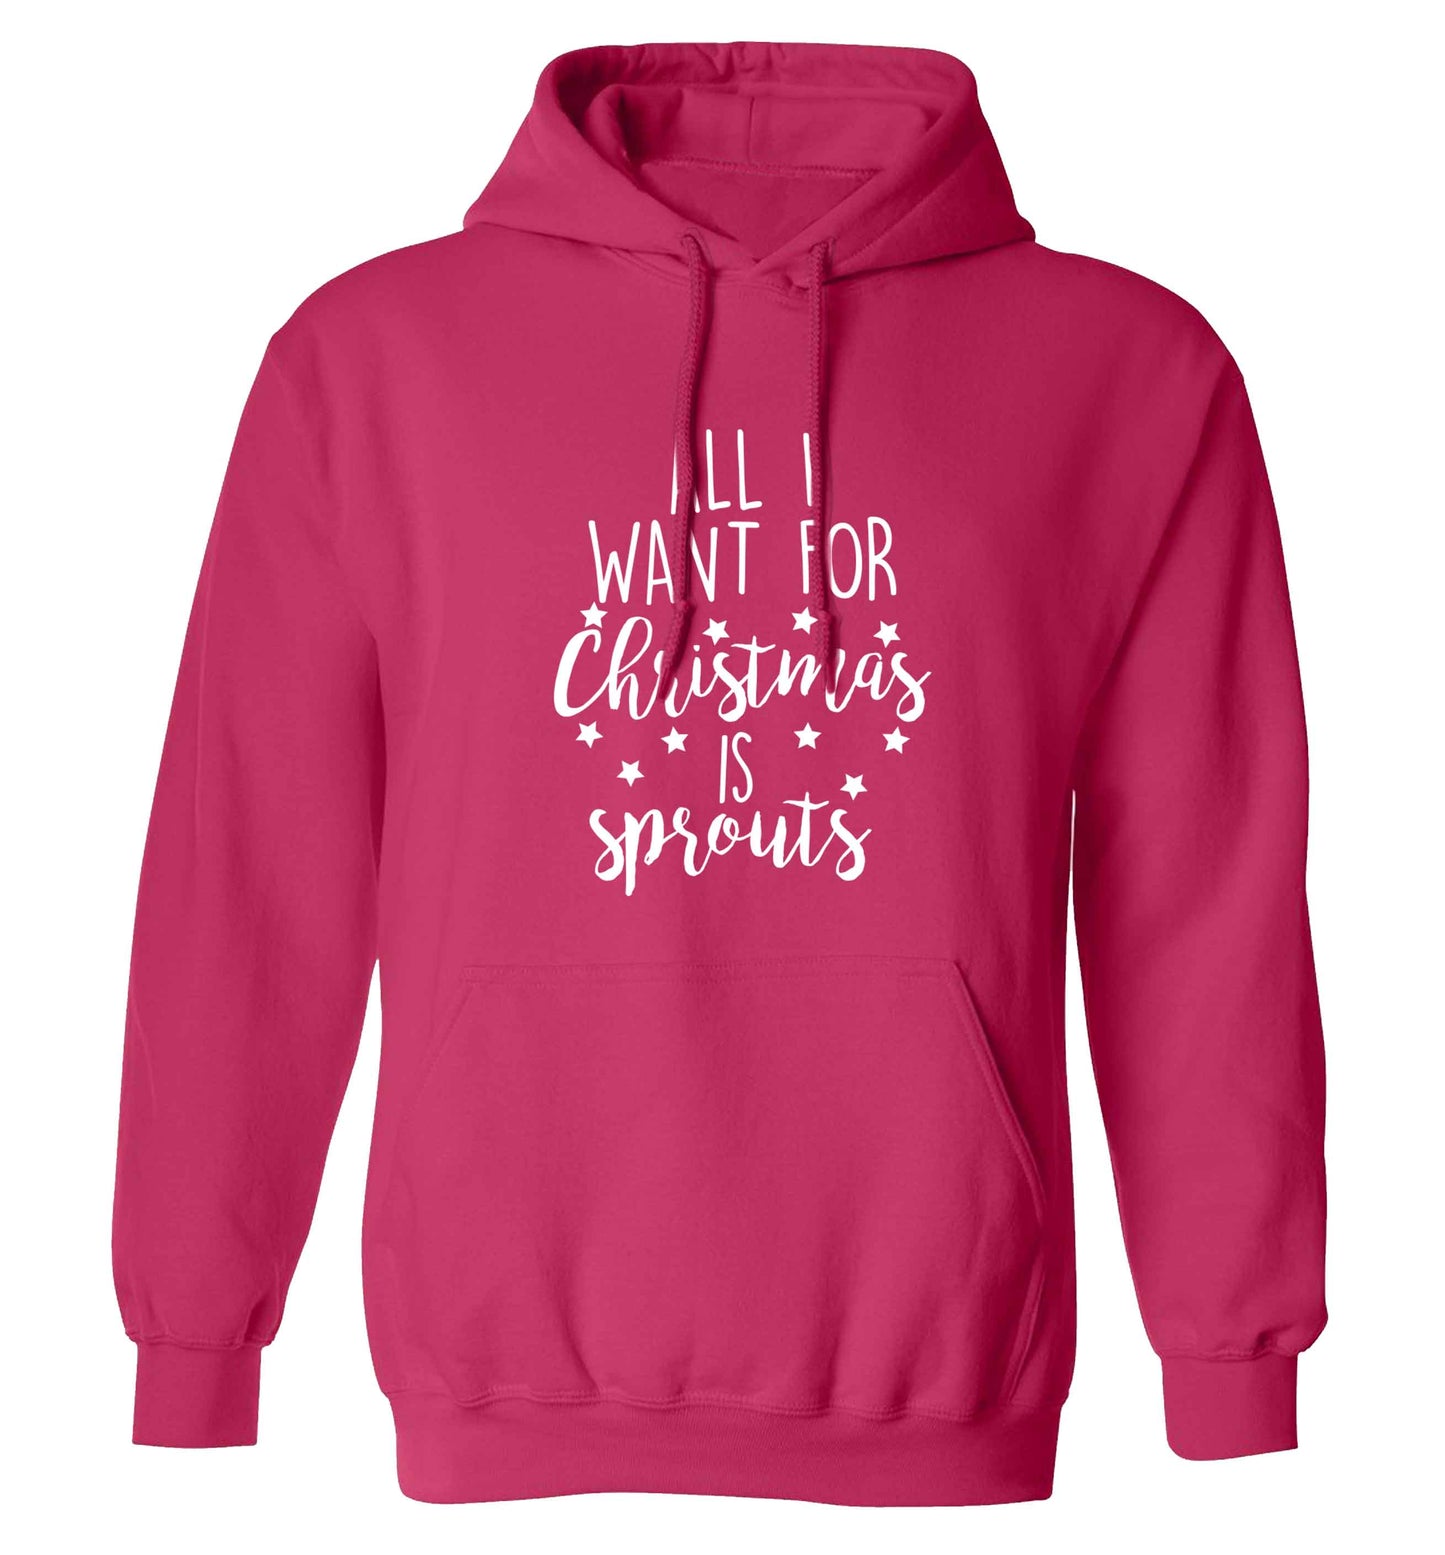 All I want for Christmas is sprouts adults unisex pink hoodie 2XL